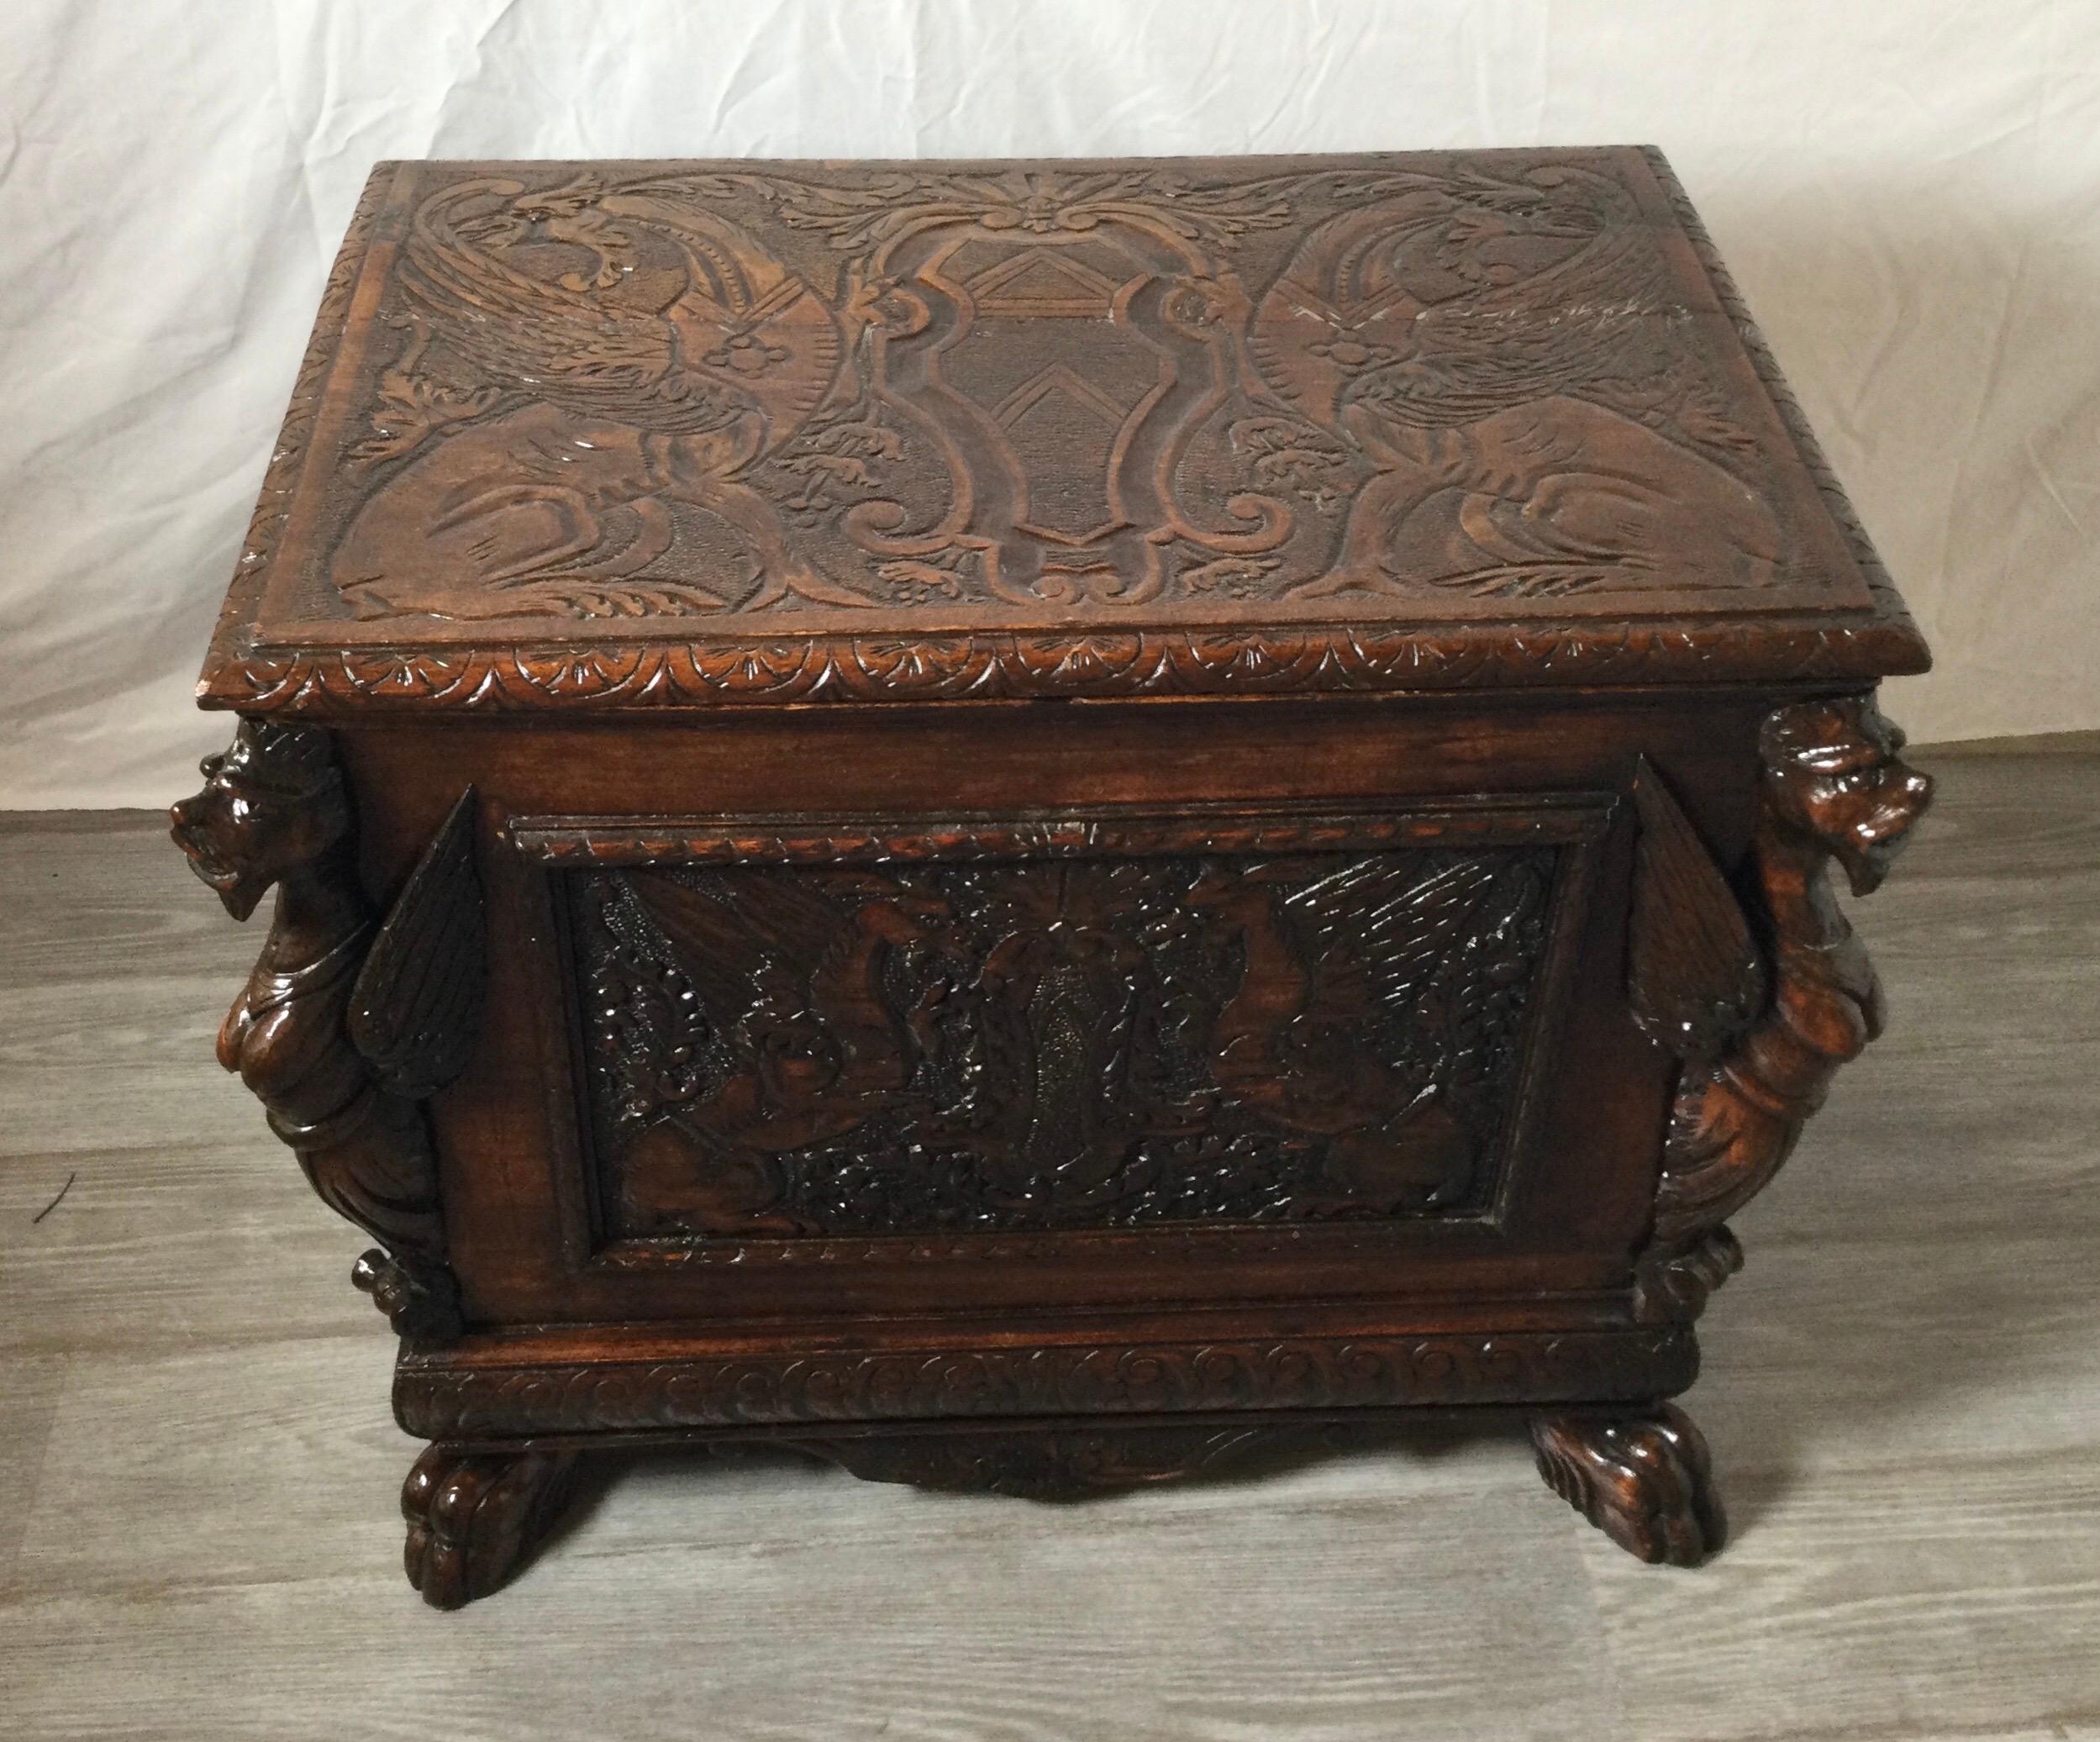 Antique English carved oak Cellarette with gargoyles and original tin insert. Refinished. Measures: 27